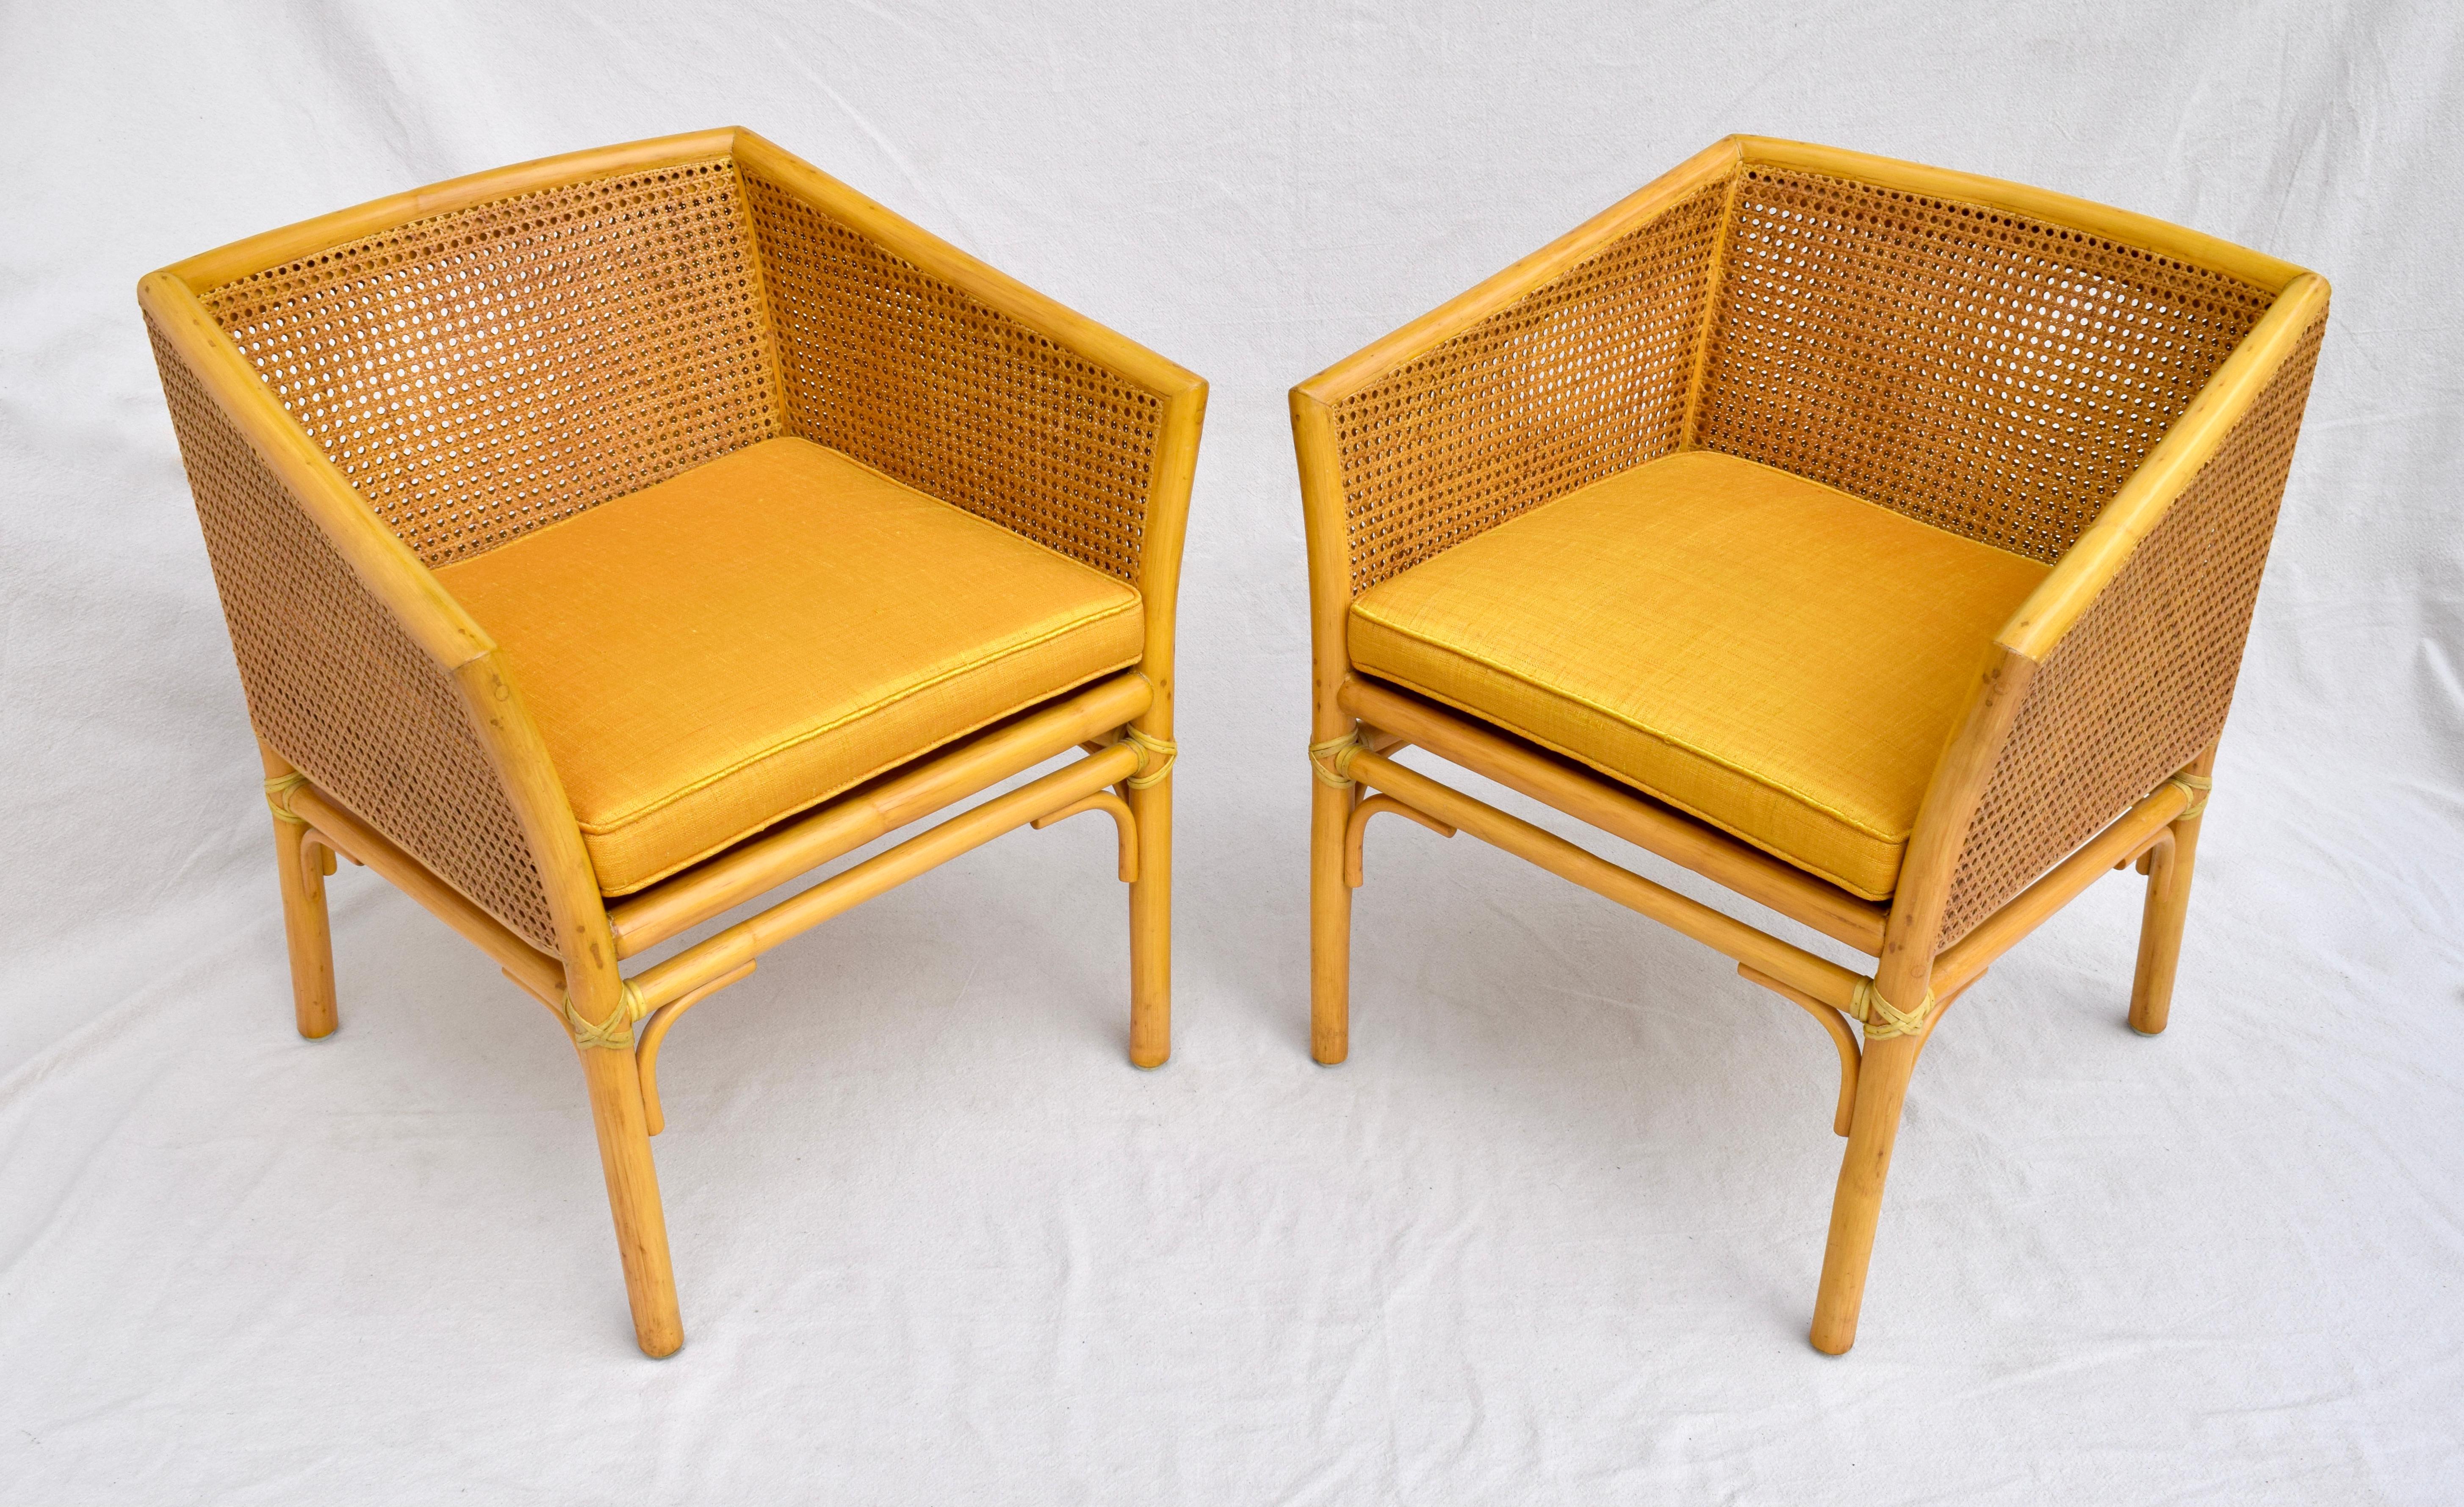 McGuire Organic Modern Double Caned Rattan Pair of Chairs 1